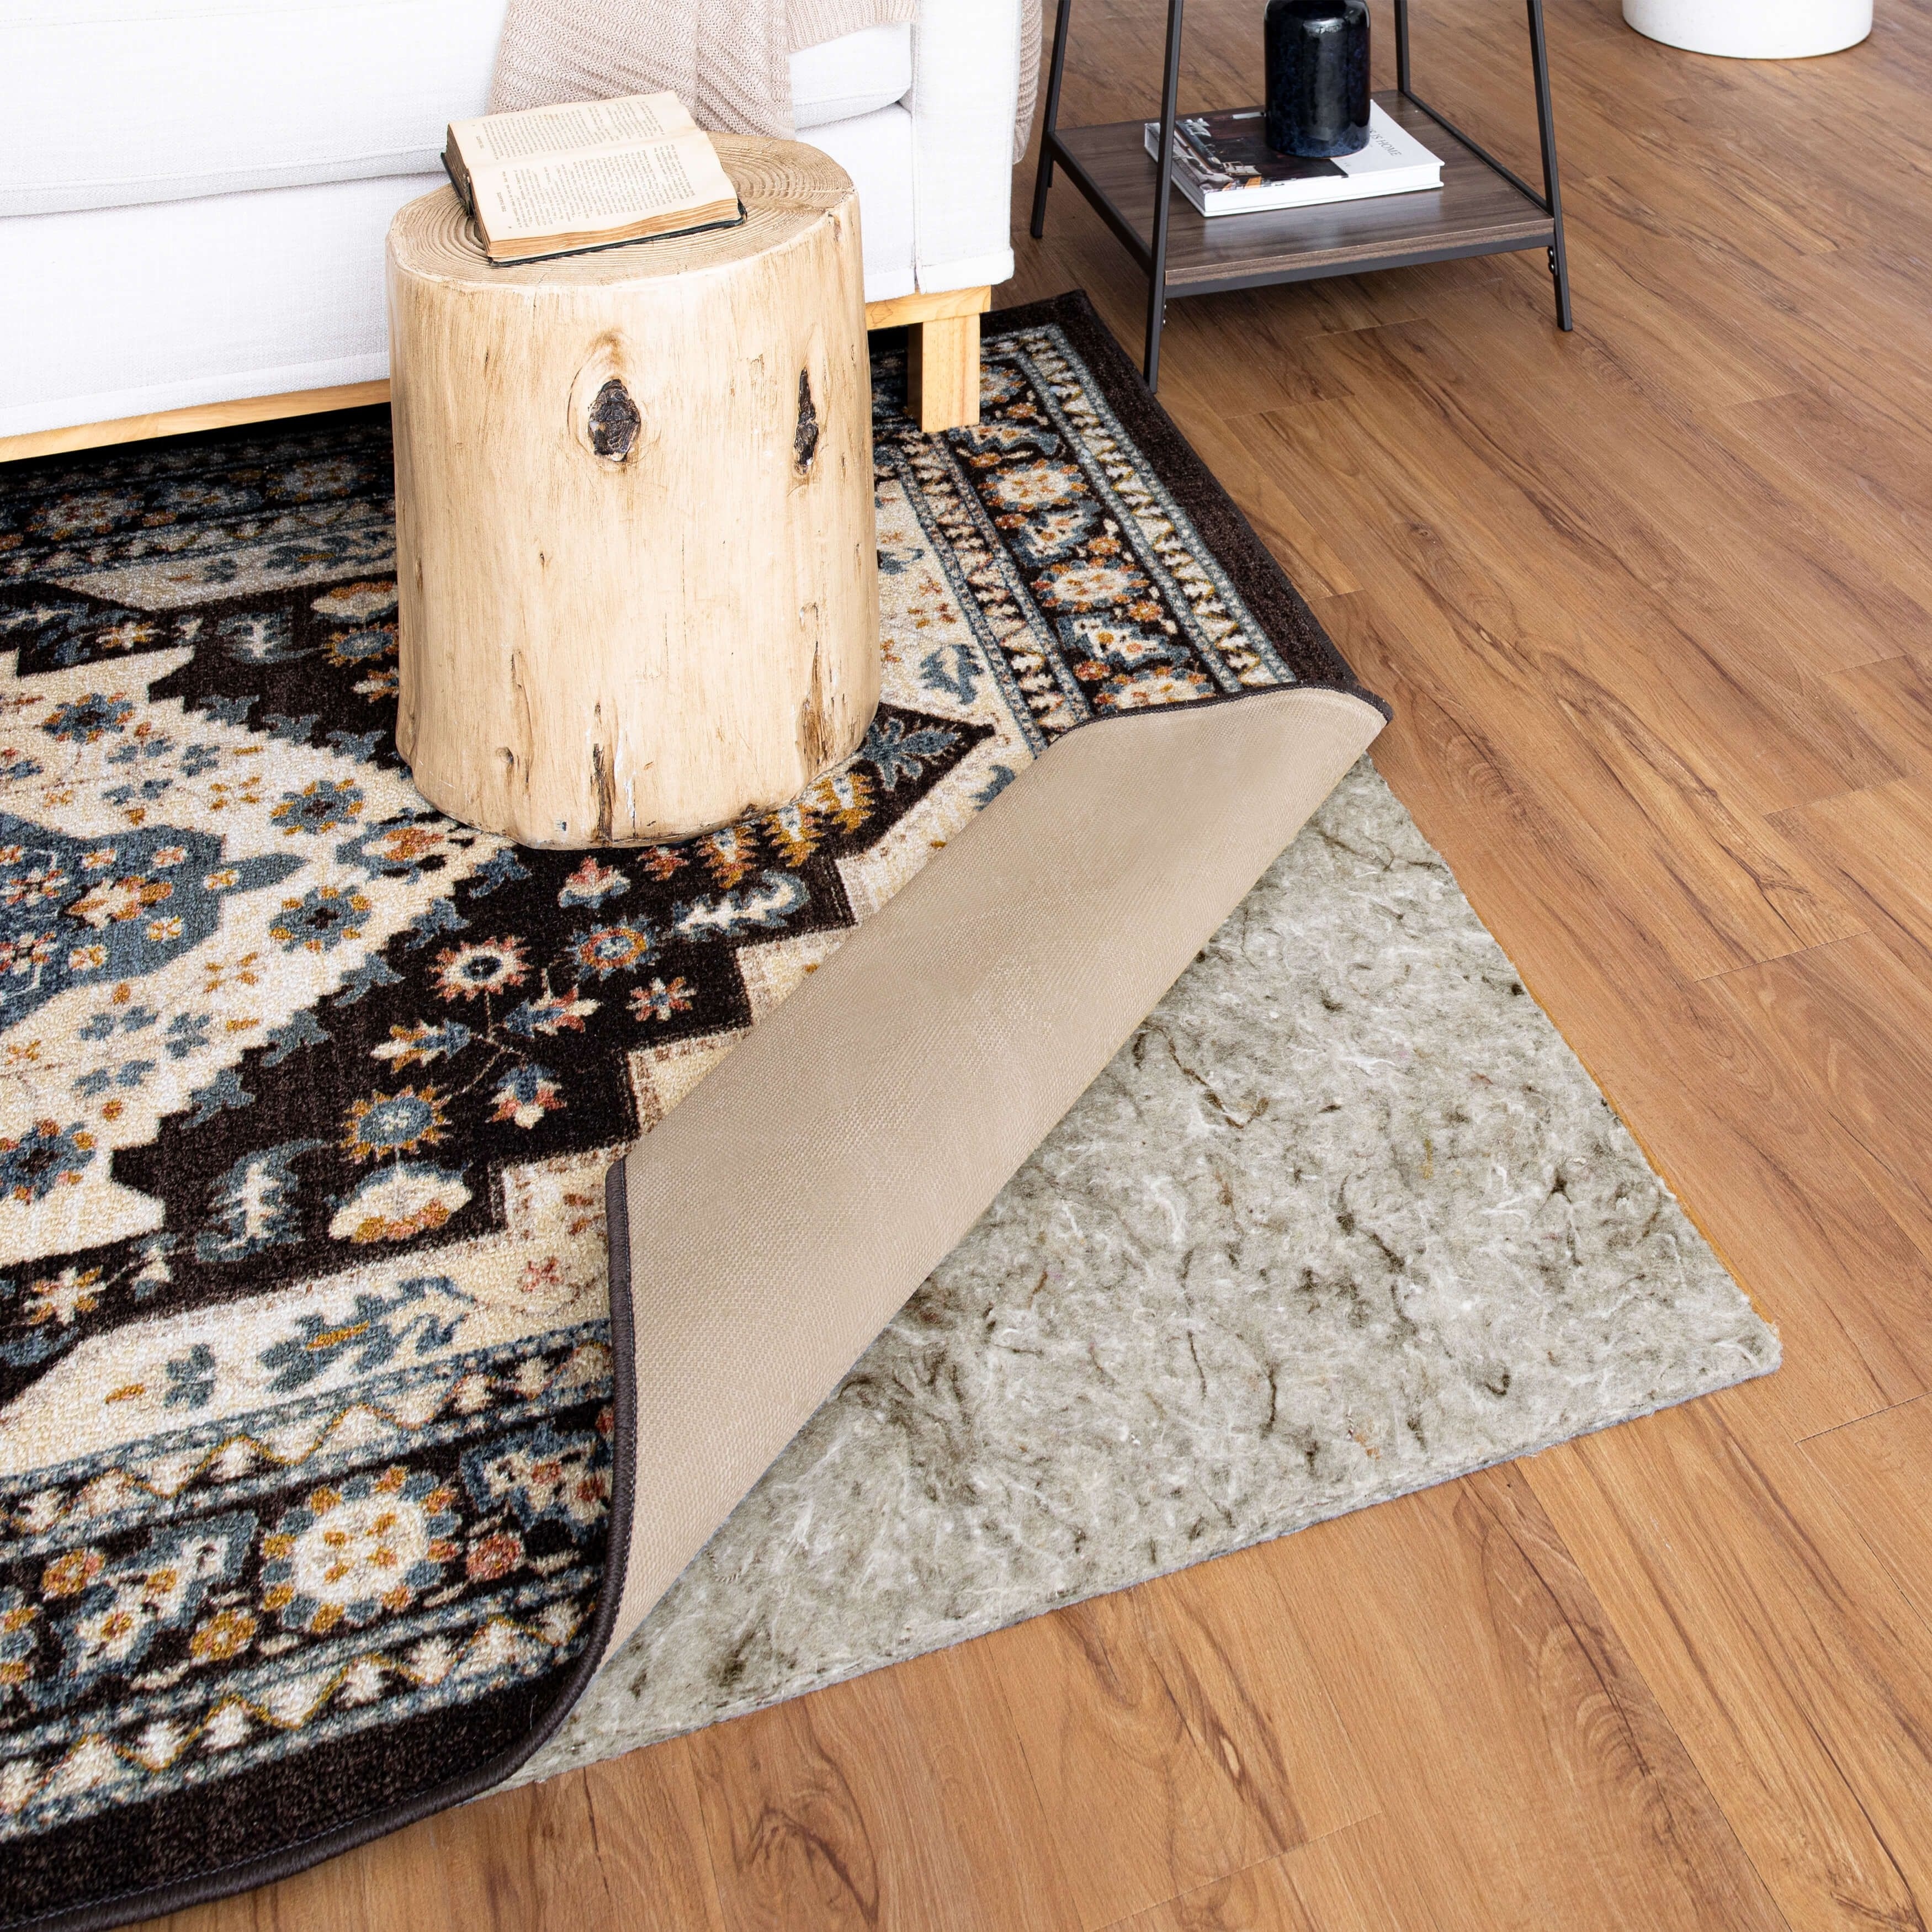 RUGPADUSA - Superior-Lock - 10'x13' - 1/4 Thick - Felt + Rubber - Premium  Non-Slip Rug Pad - Perfect for Hardwood Floors, Available in 2 Thicknesses